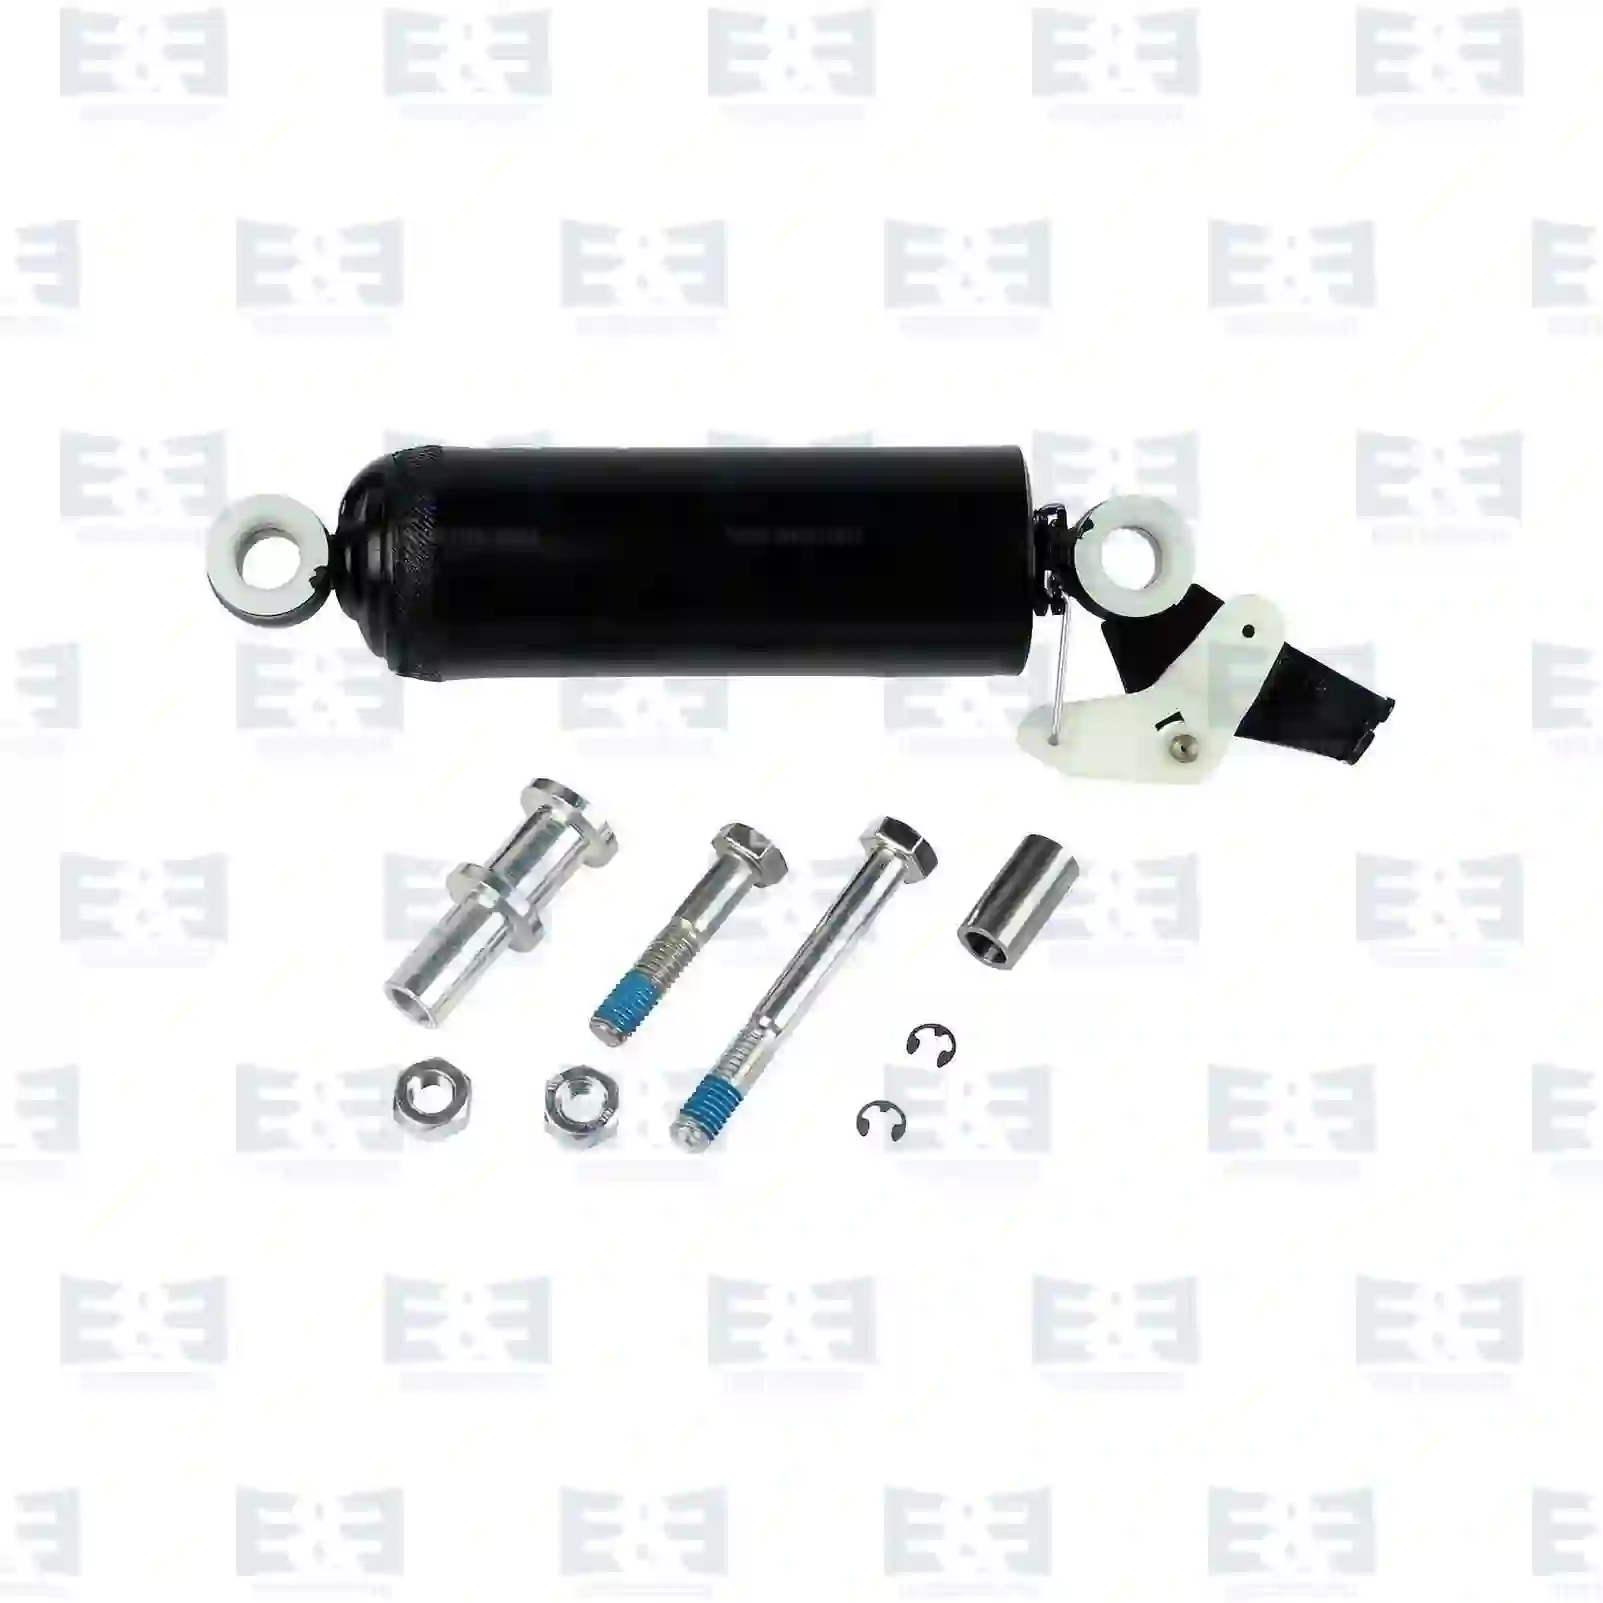 Seat Shock absorber, seat, without accessories, EE No 2E2276226 ,  oem no:0019191245, 5001857903, 1498862, 2438272, 20443547, ZG41656-0008 E&E Truck Spare Parts | Truck Spare Parts, Auotomotive Spare Parts